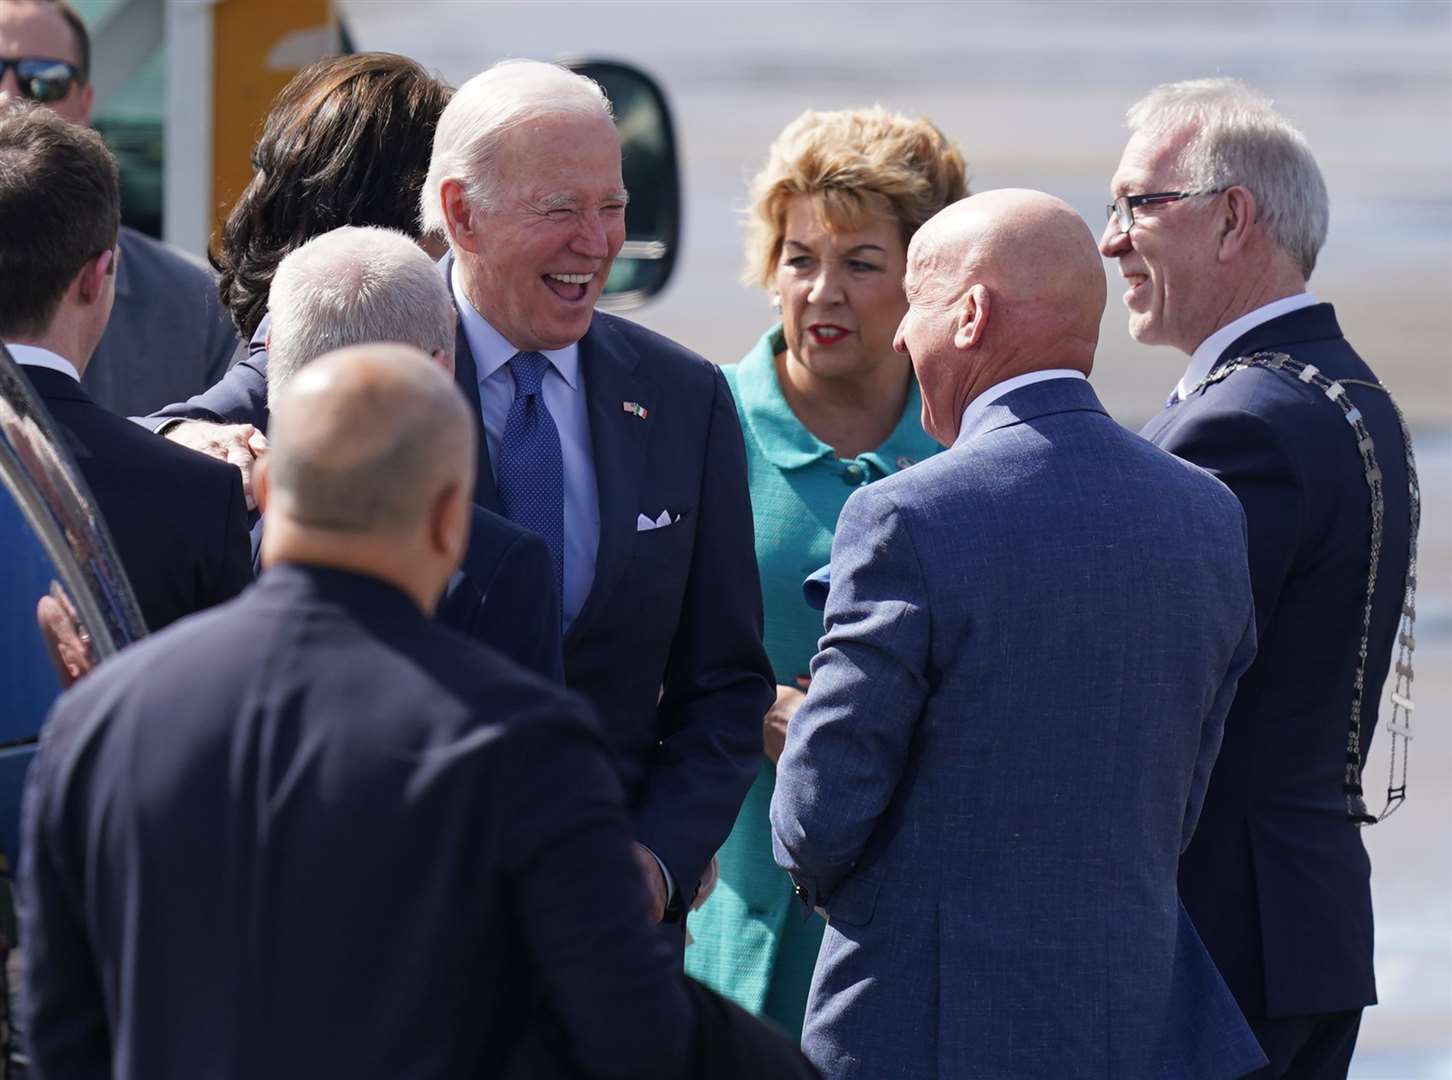 Mr Biden is welcomed as he arrives at Ireland West Airport in Co Mayo (Niall Carson/PA)